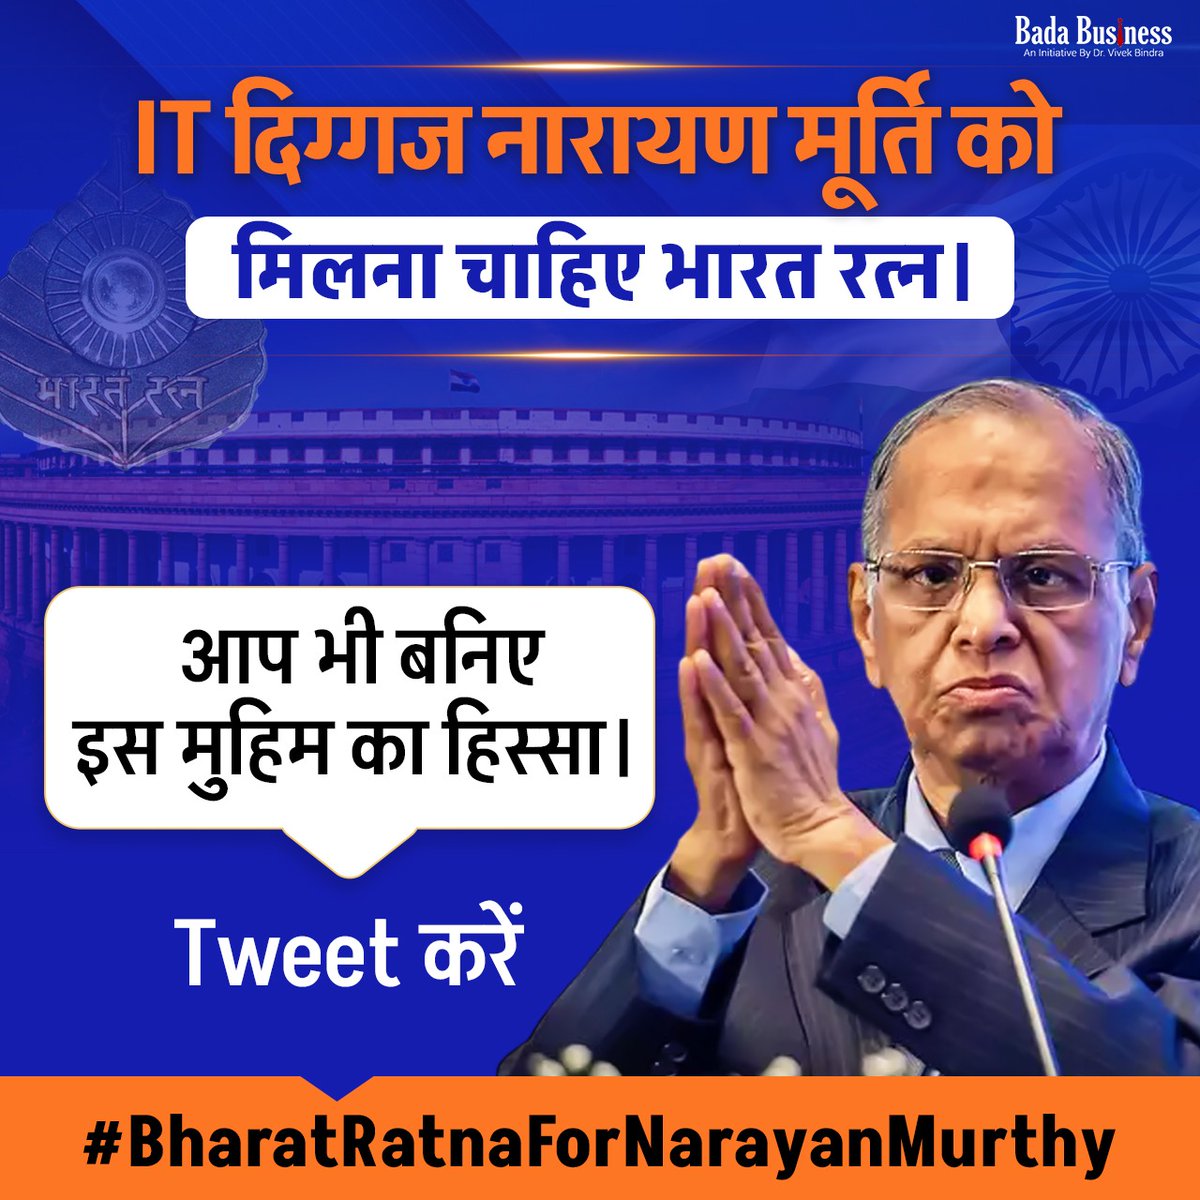 From starting Infosys to shaping the future of technology in India, Narayana Murthy's journey is a beacon of excellence. Let's support #BharatRatnaForNarayanaMurthy